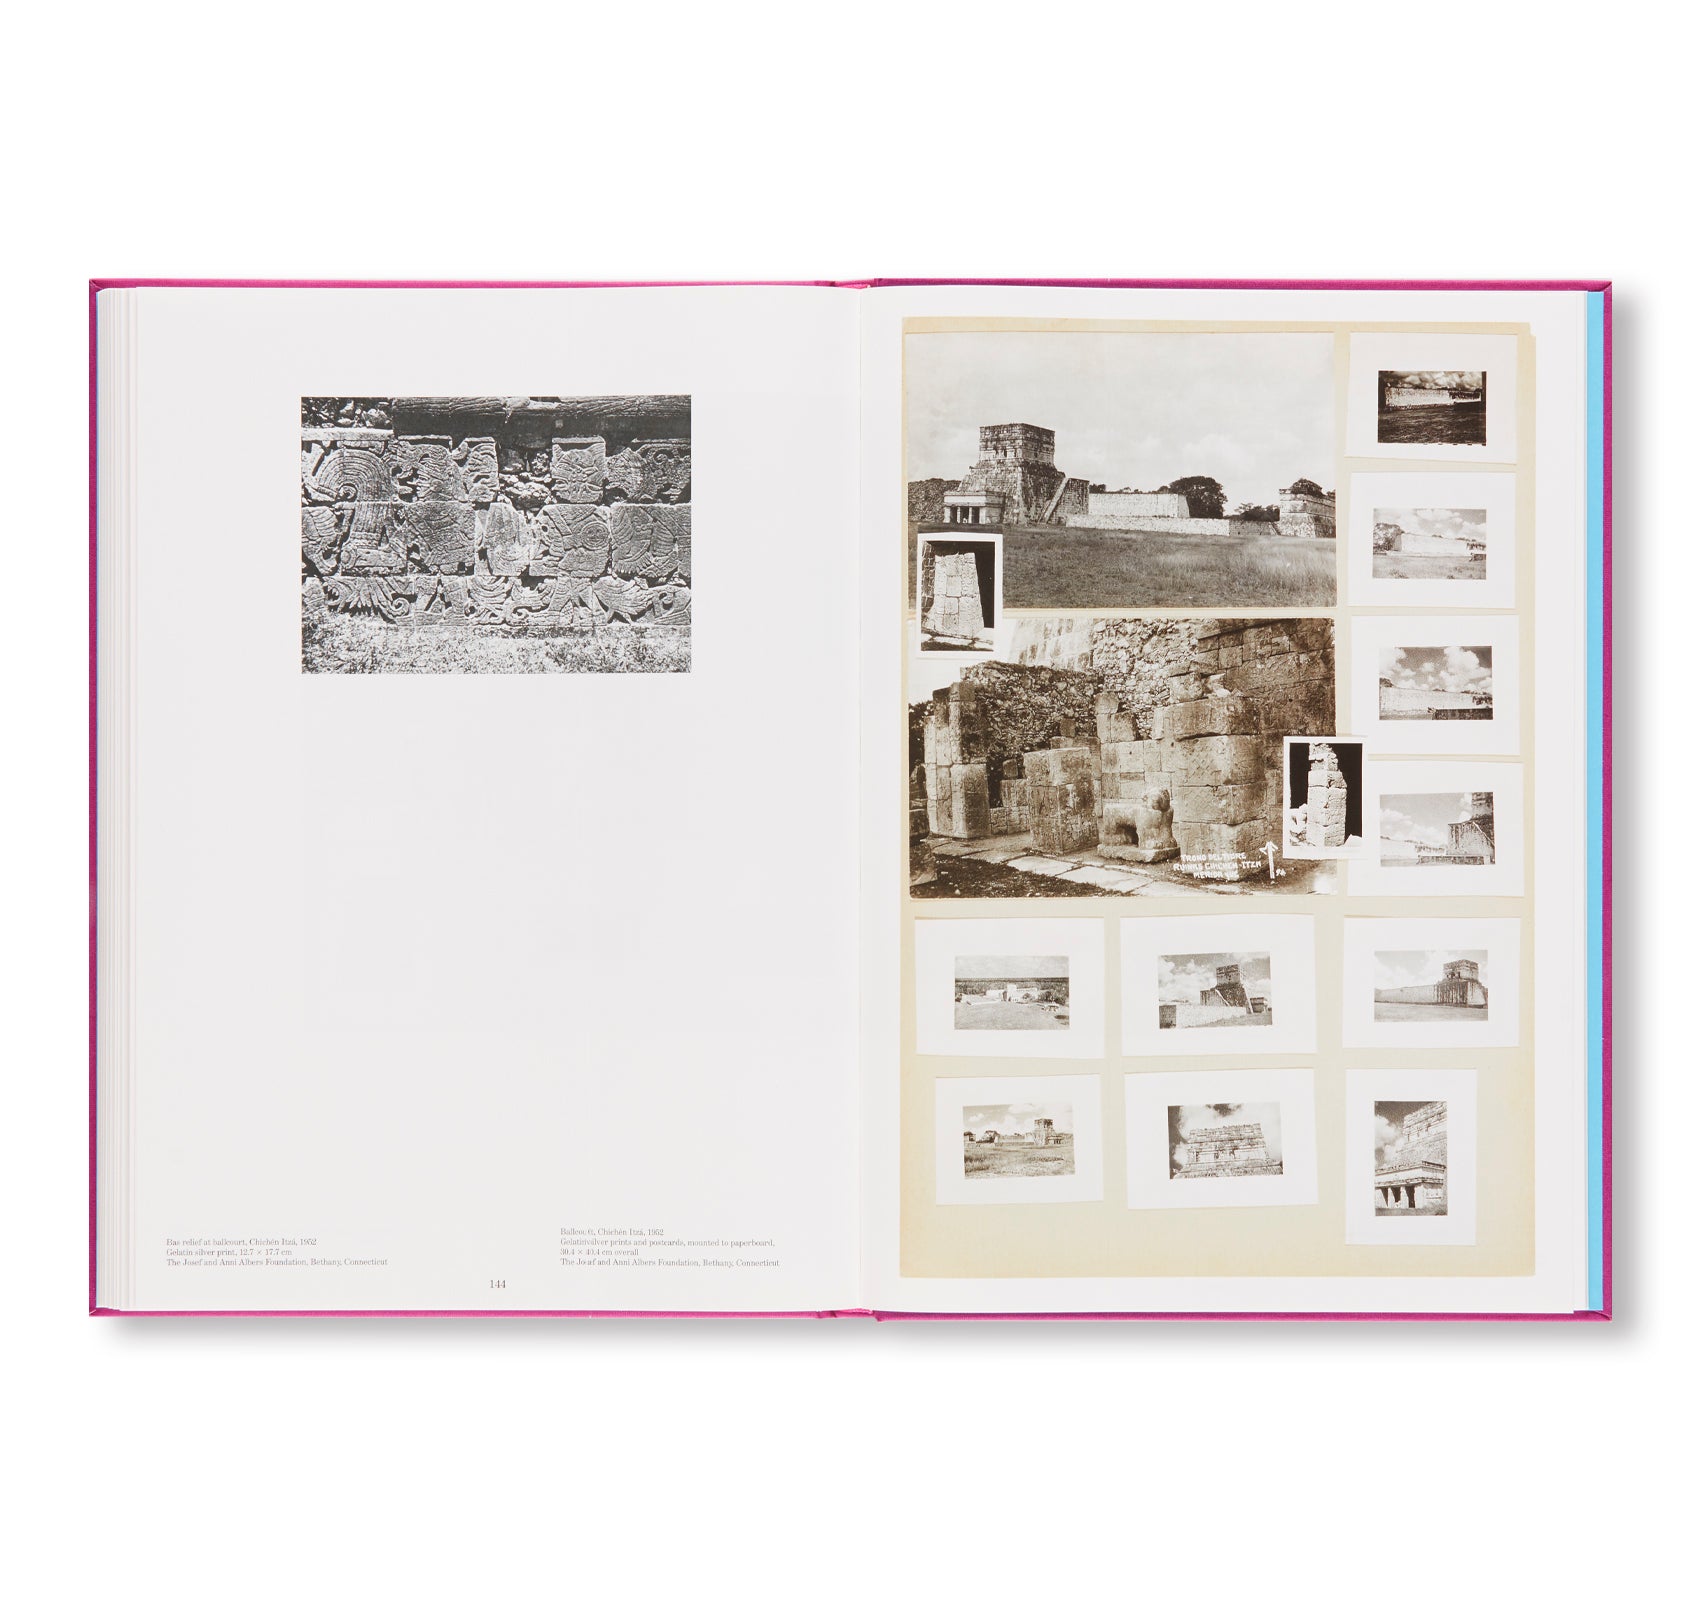 JOSEF ALBERS IN MEXICO by Josef Albers